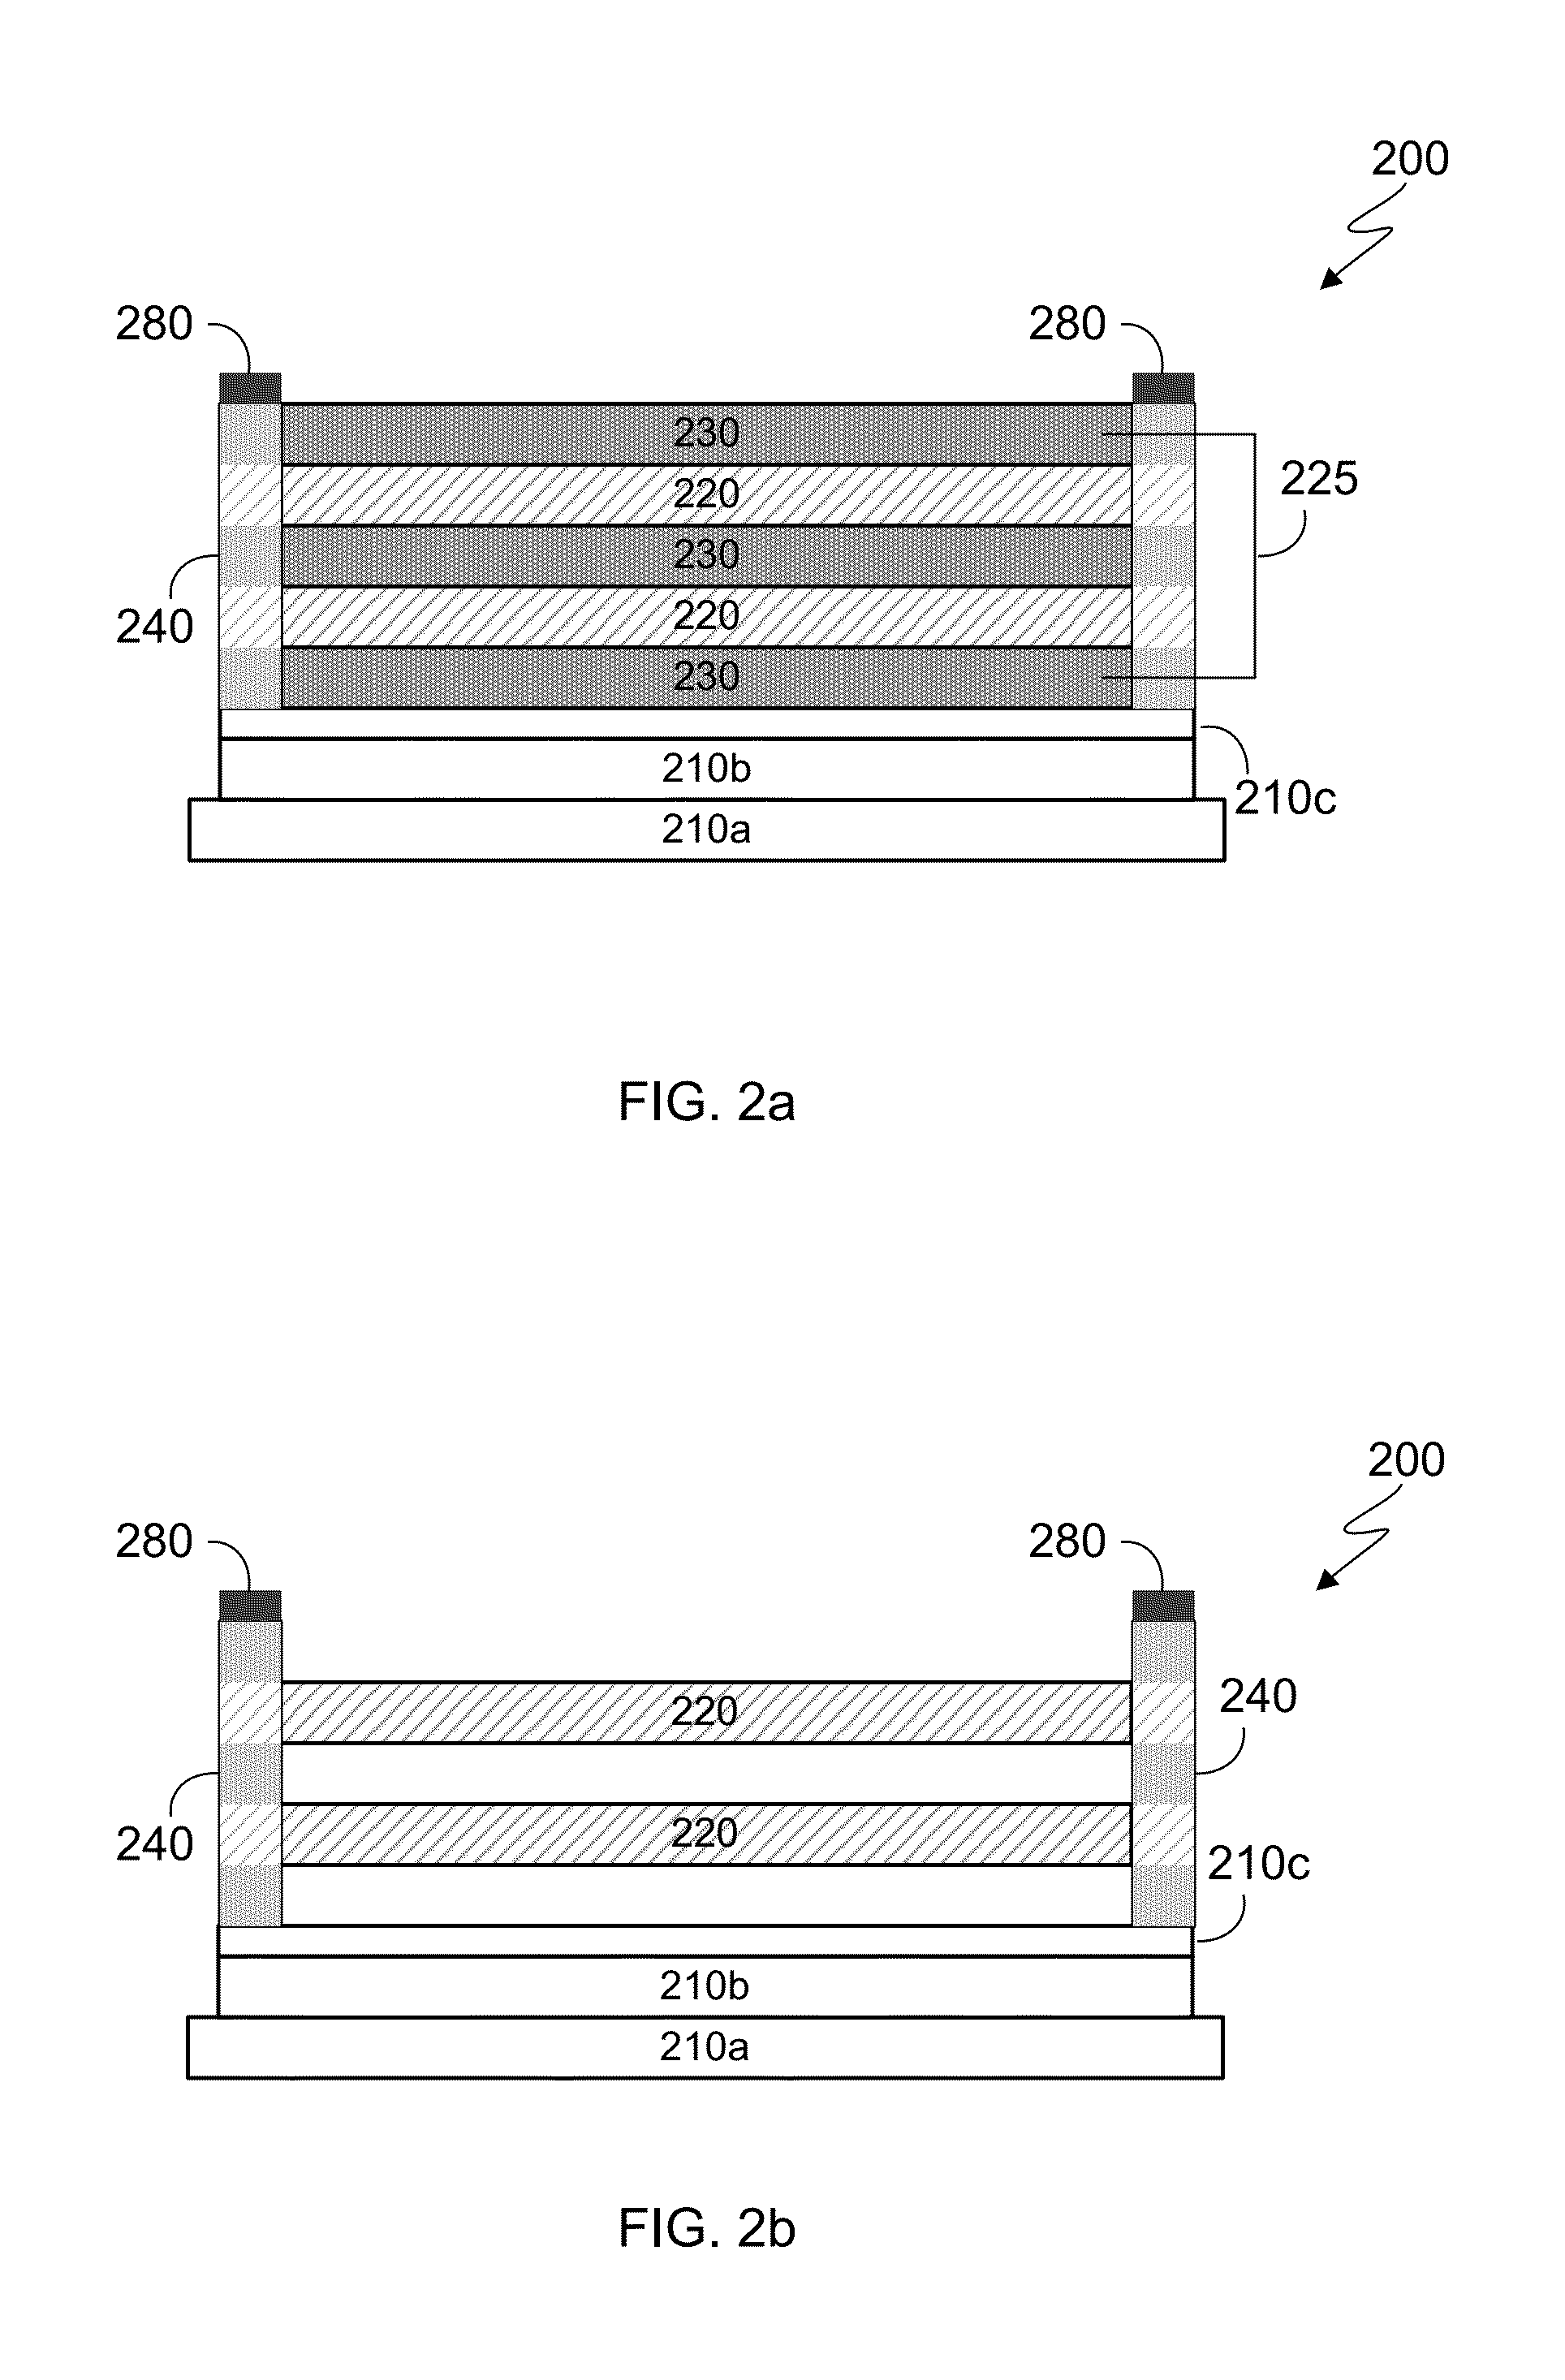 Nanowire device with improved epitaxy